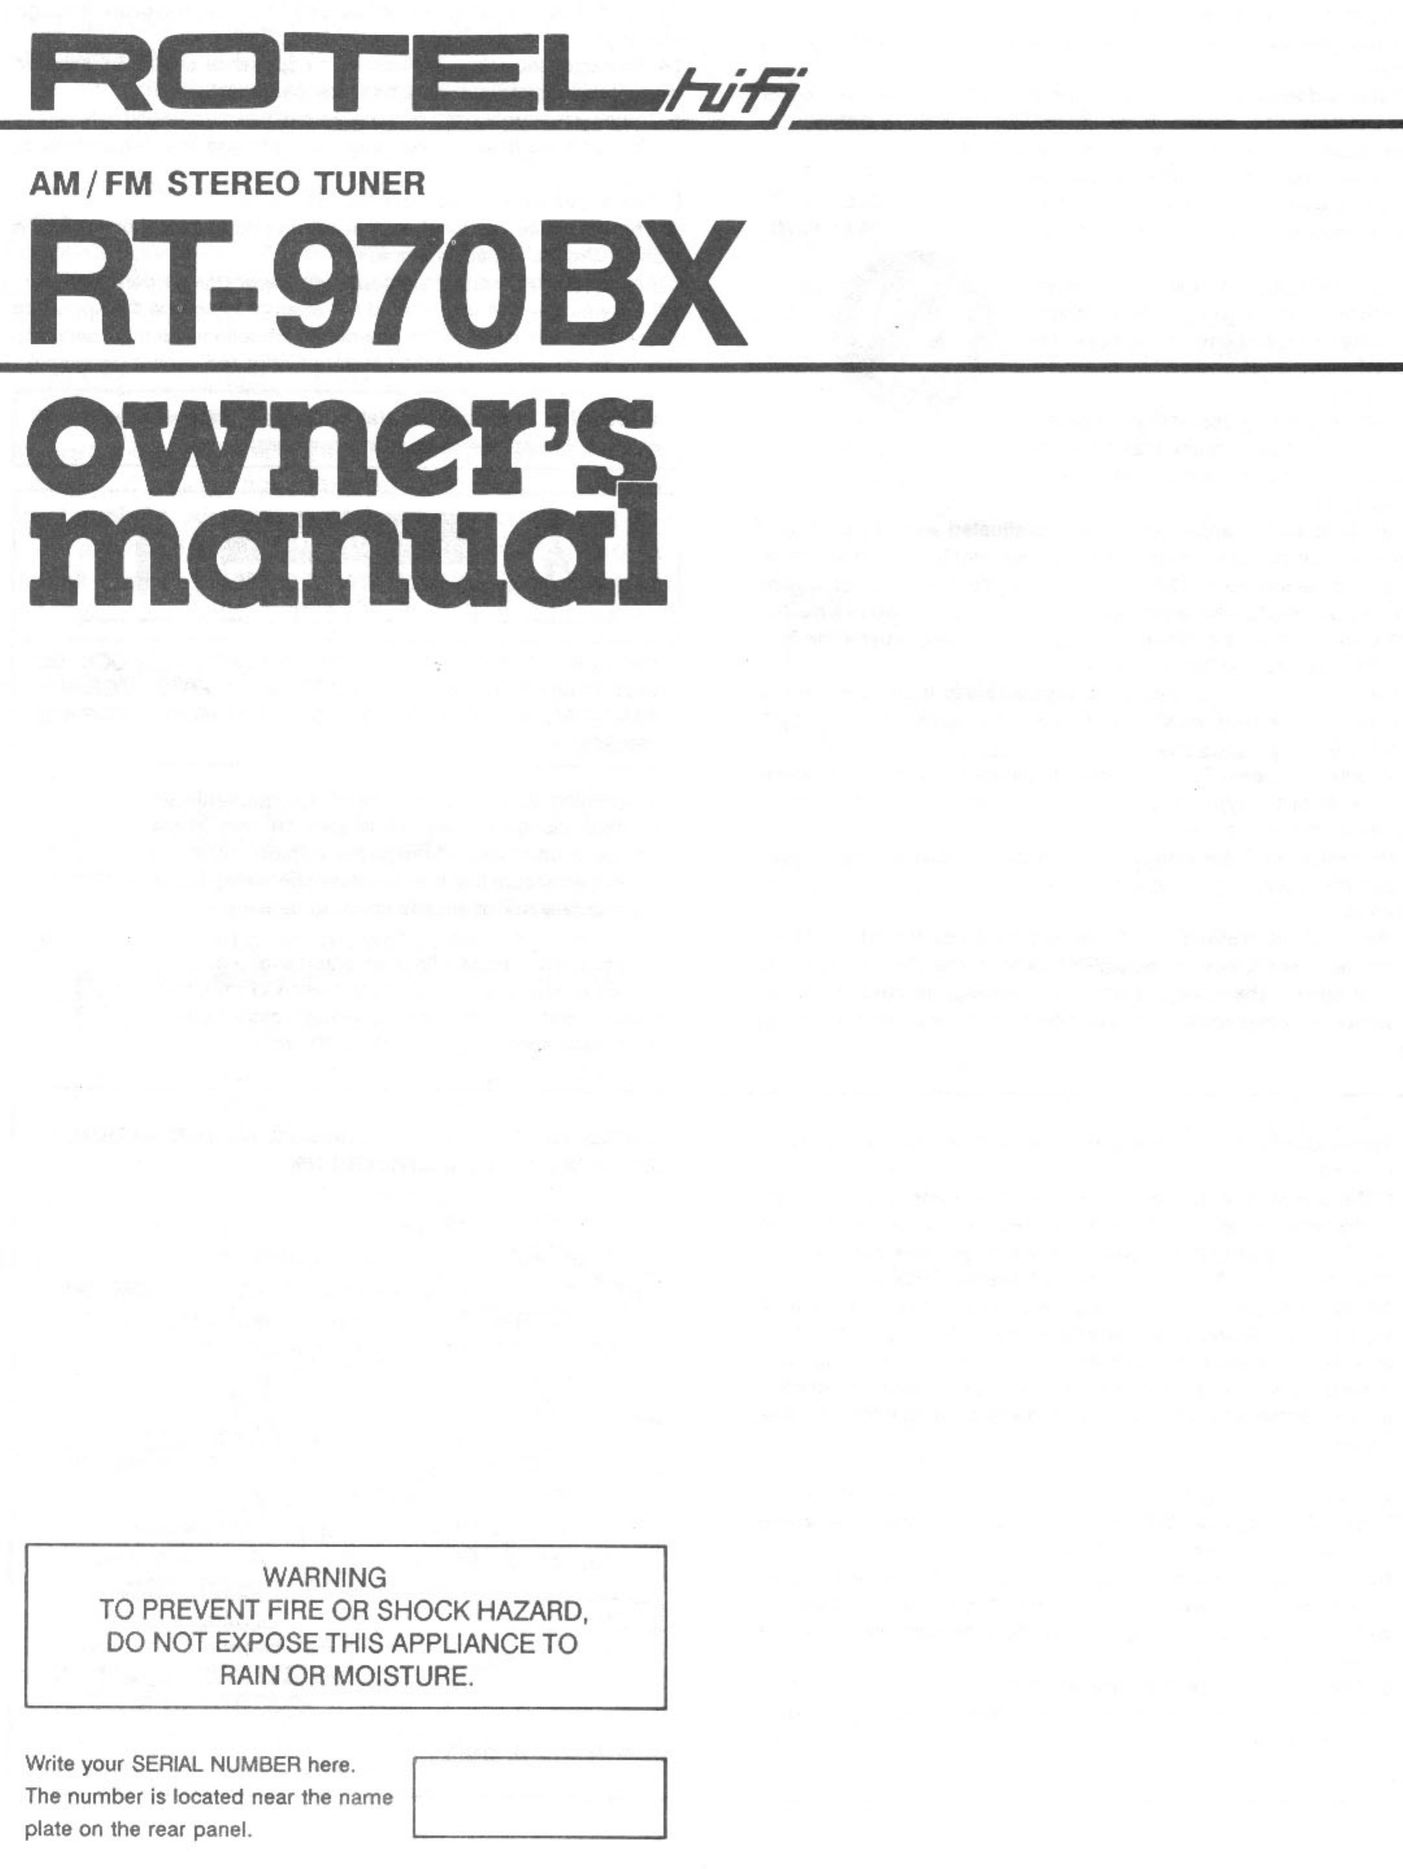 Rotel RT-970BX Car Stereo System User Manual